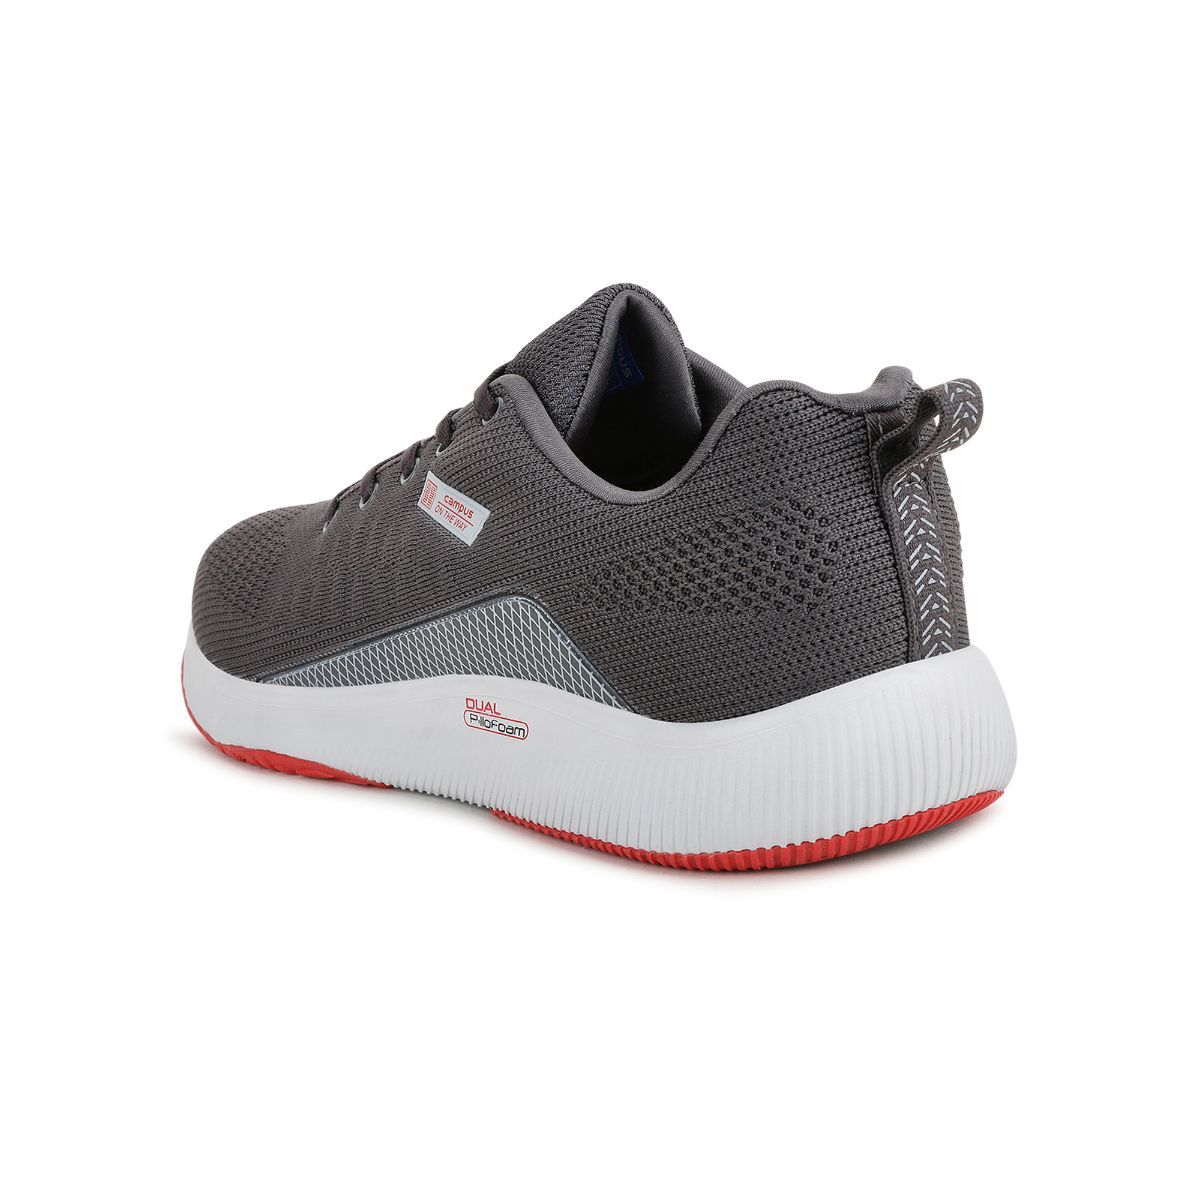 Campus Toll Grey Running Shoes: Buy Campus Toll Grey Running Shoes ...